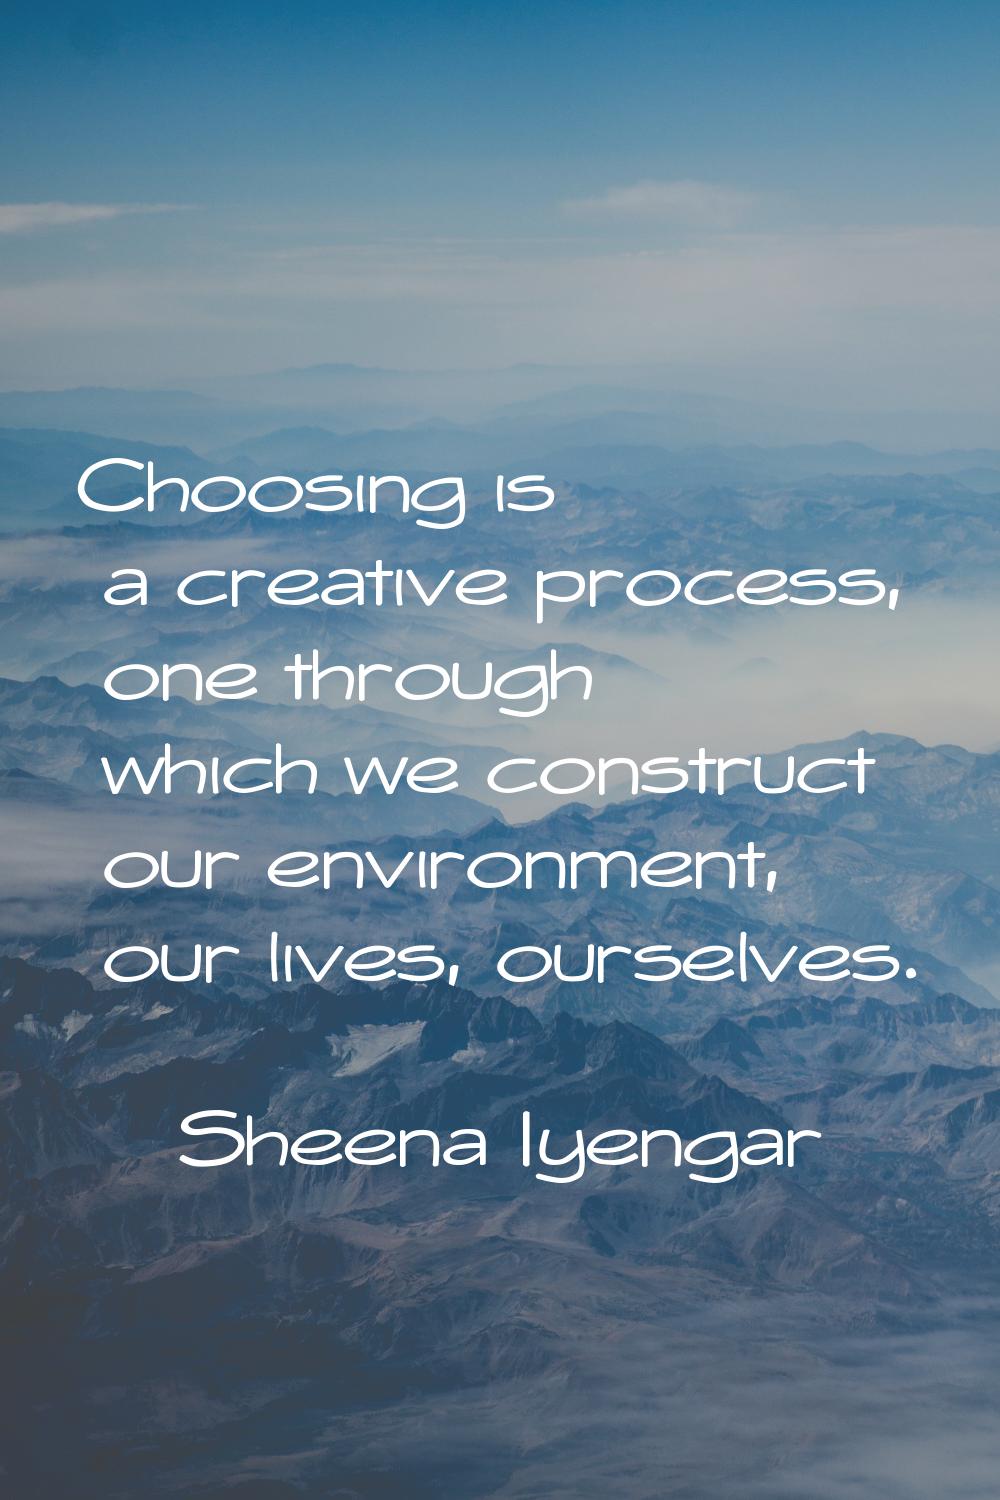 Choosing is a creative process, one through which we construct our environment, our lives, ourselve